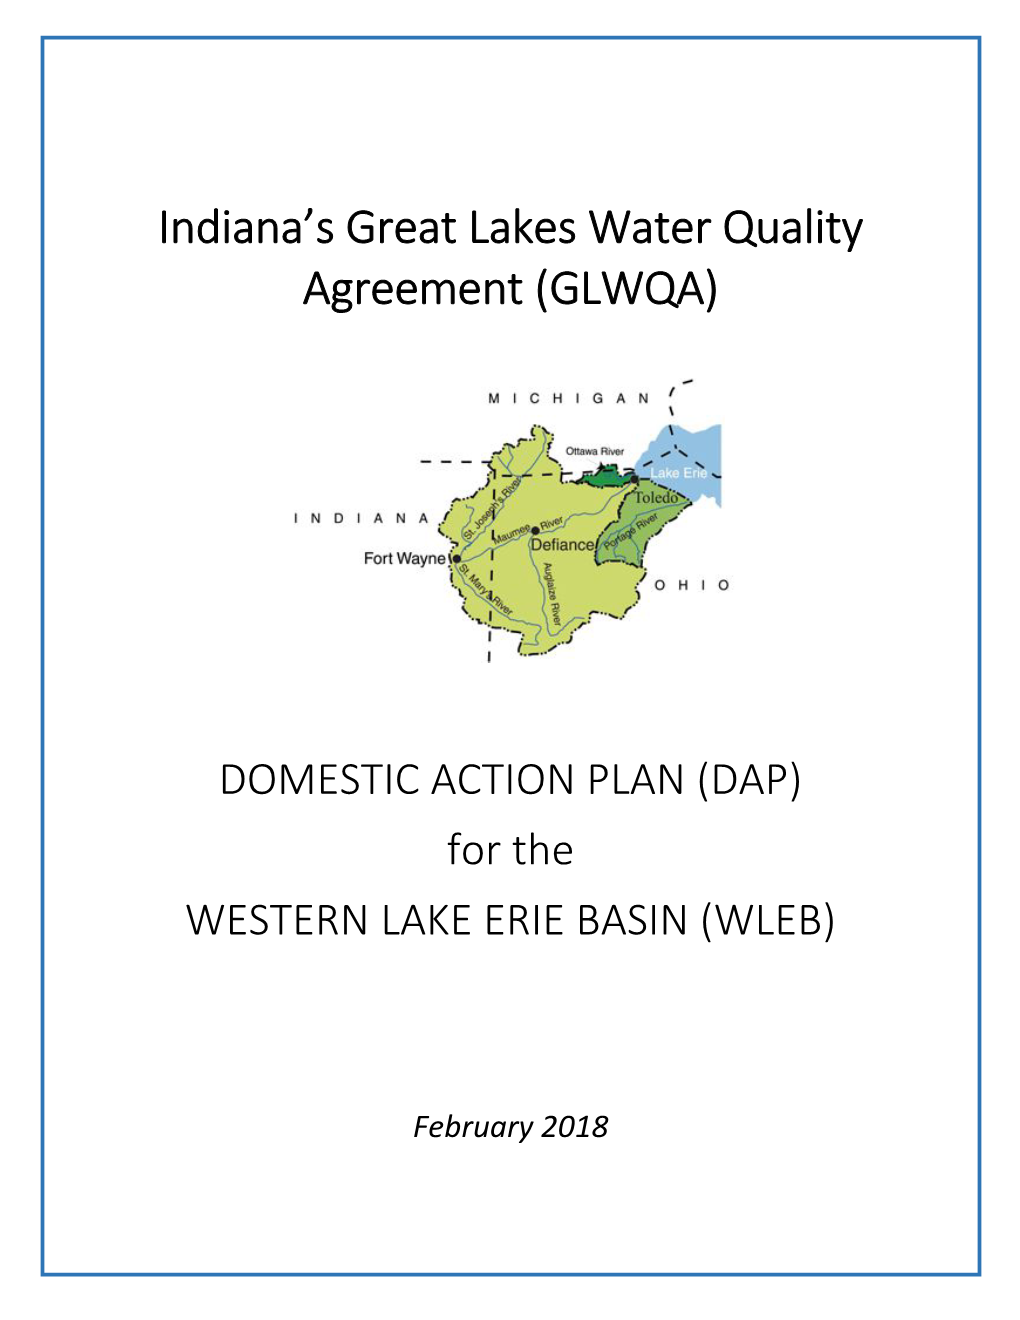 Indiana's Great Lakes Water Quality Agreement (GLWQA) Domestic Action Plan (DAP) for the Western Lake Erie Basin (WLEB)